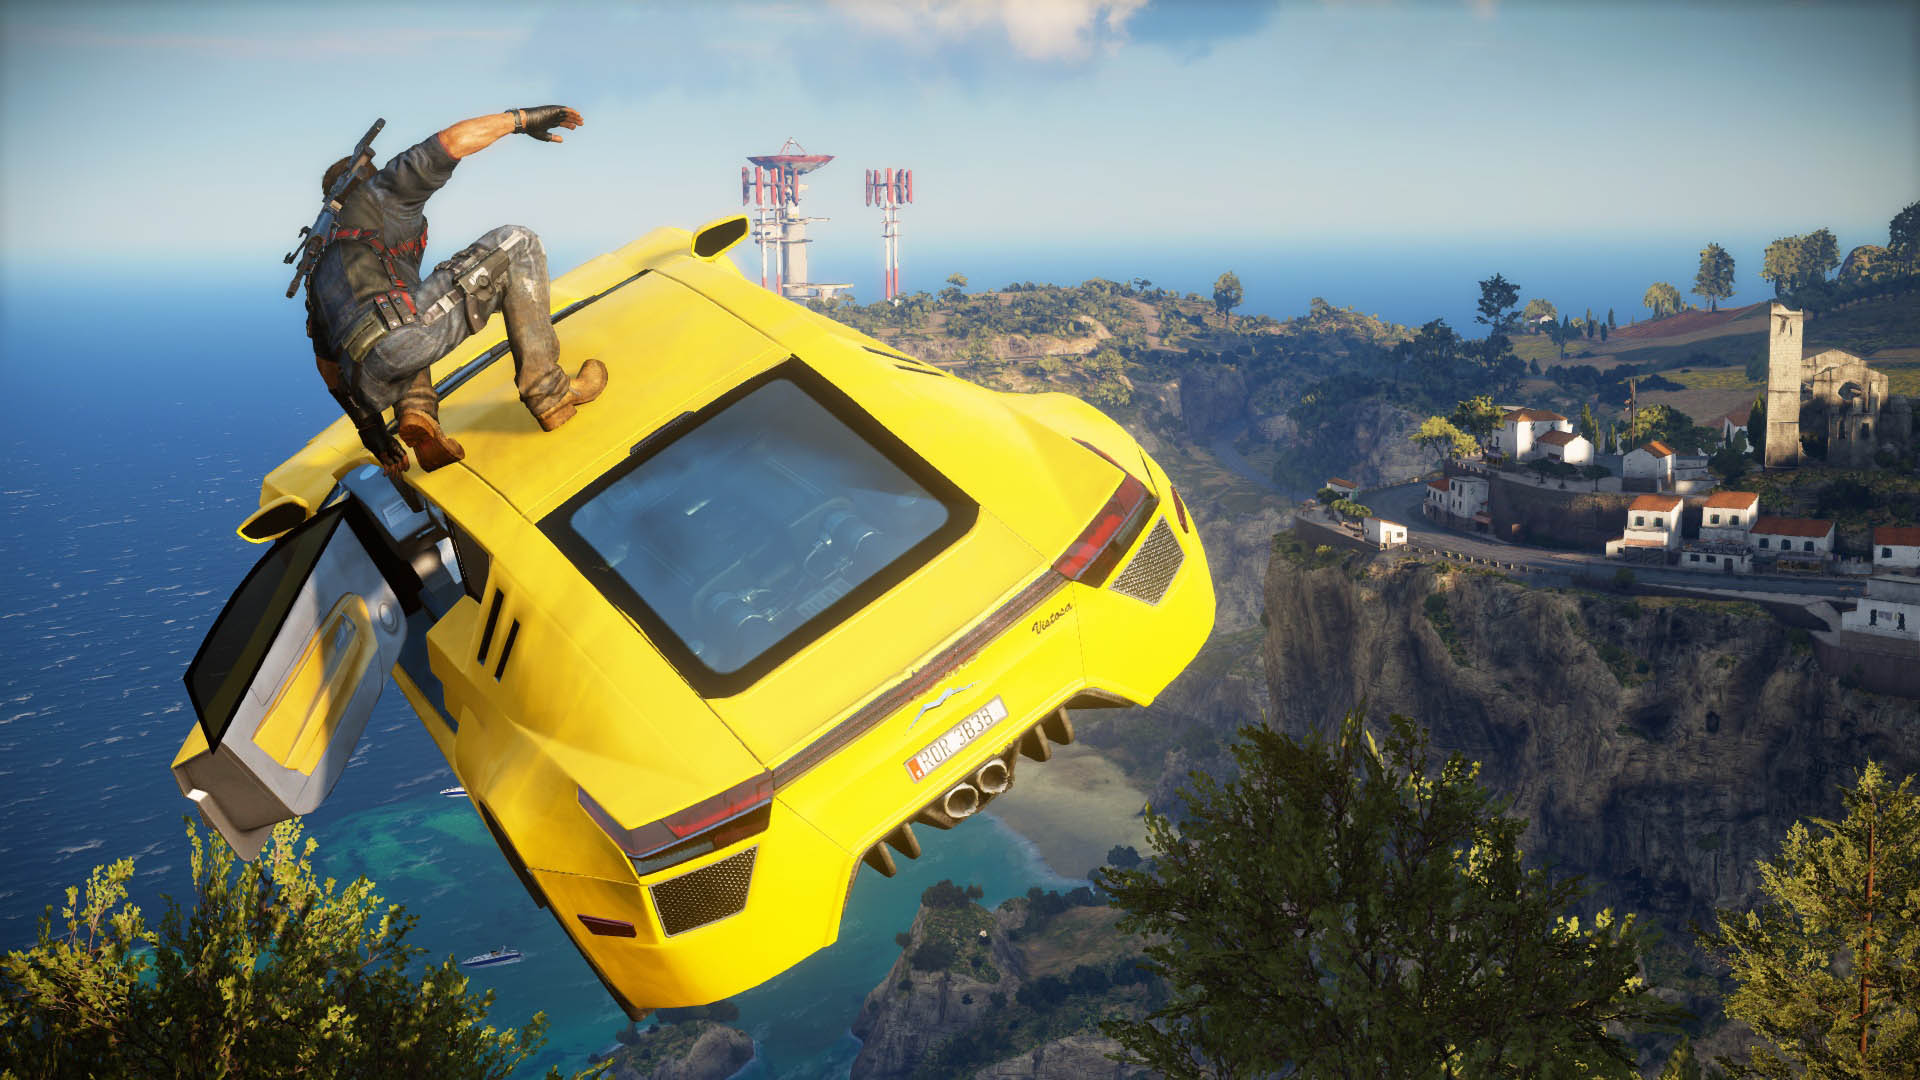 Just cause 3's Rico Rodriguez climbing on top of a car that's sailing through the air